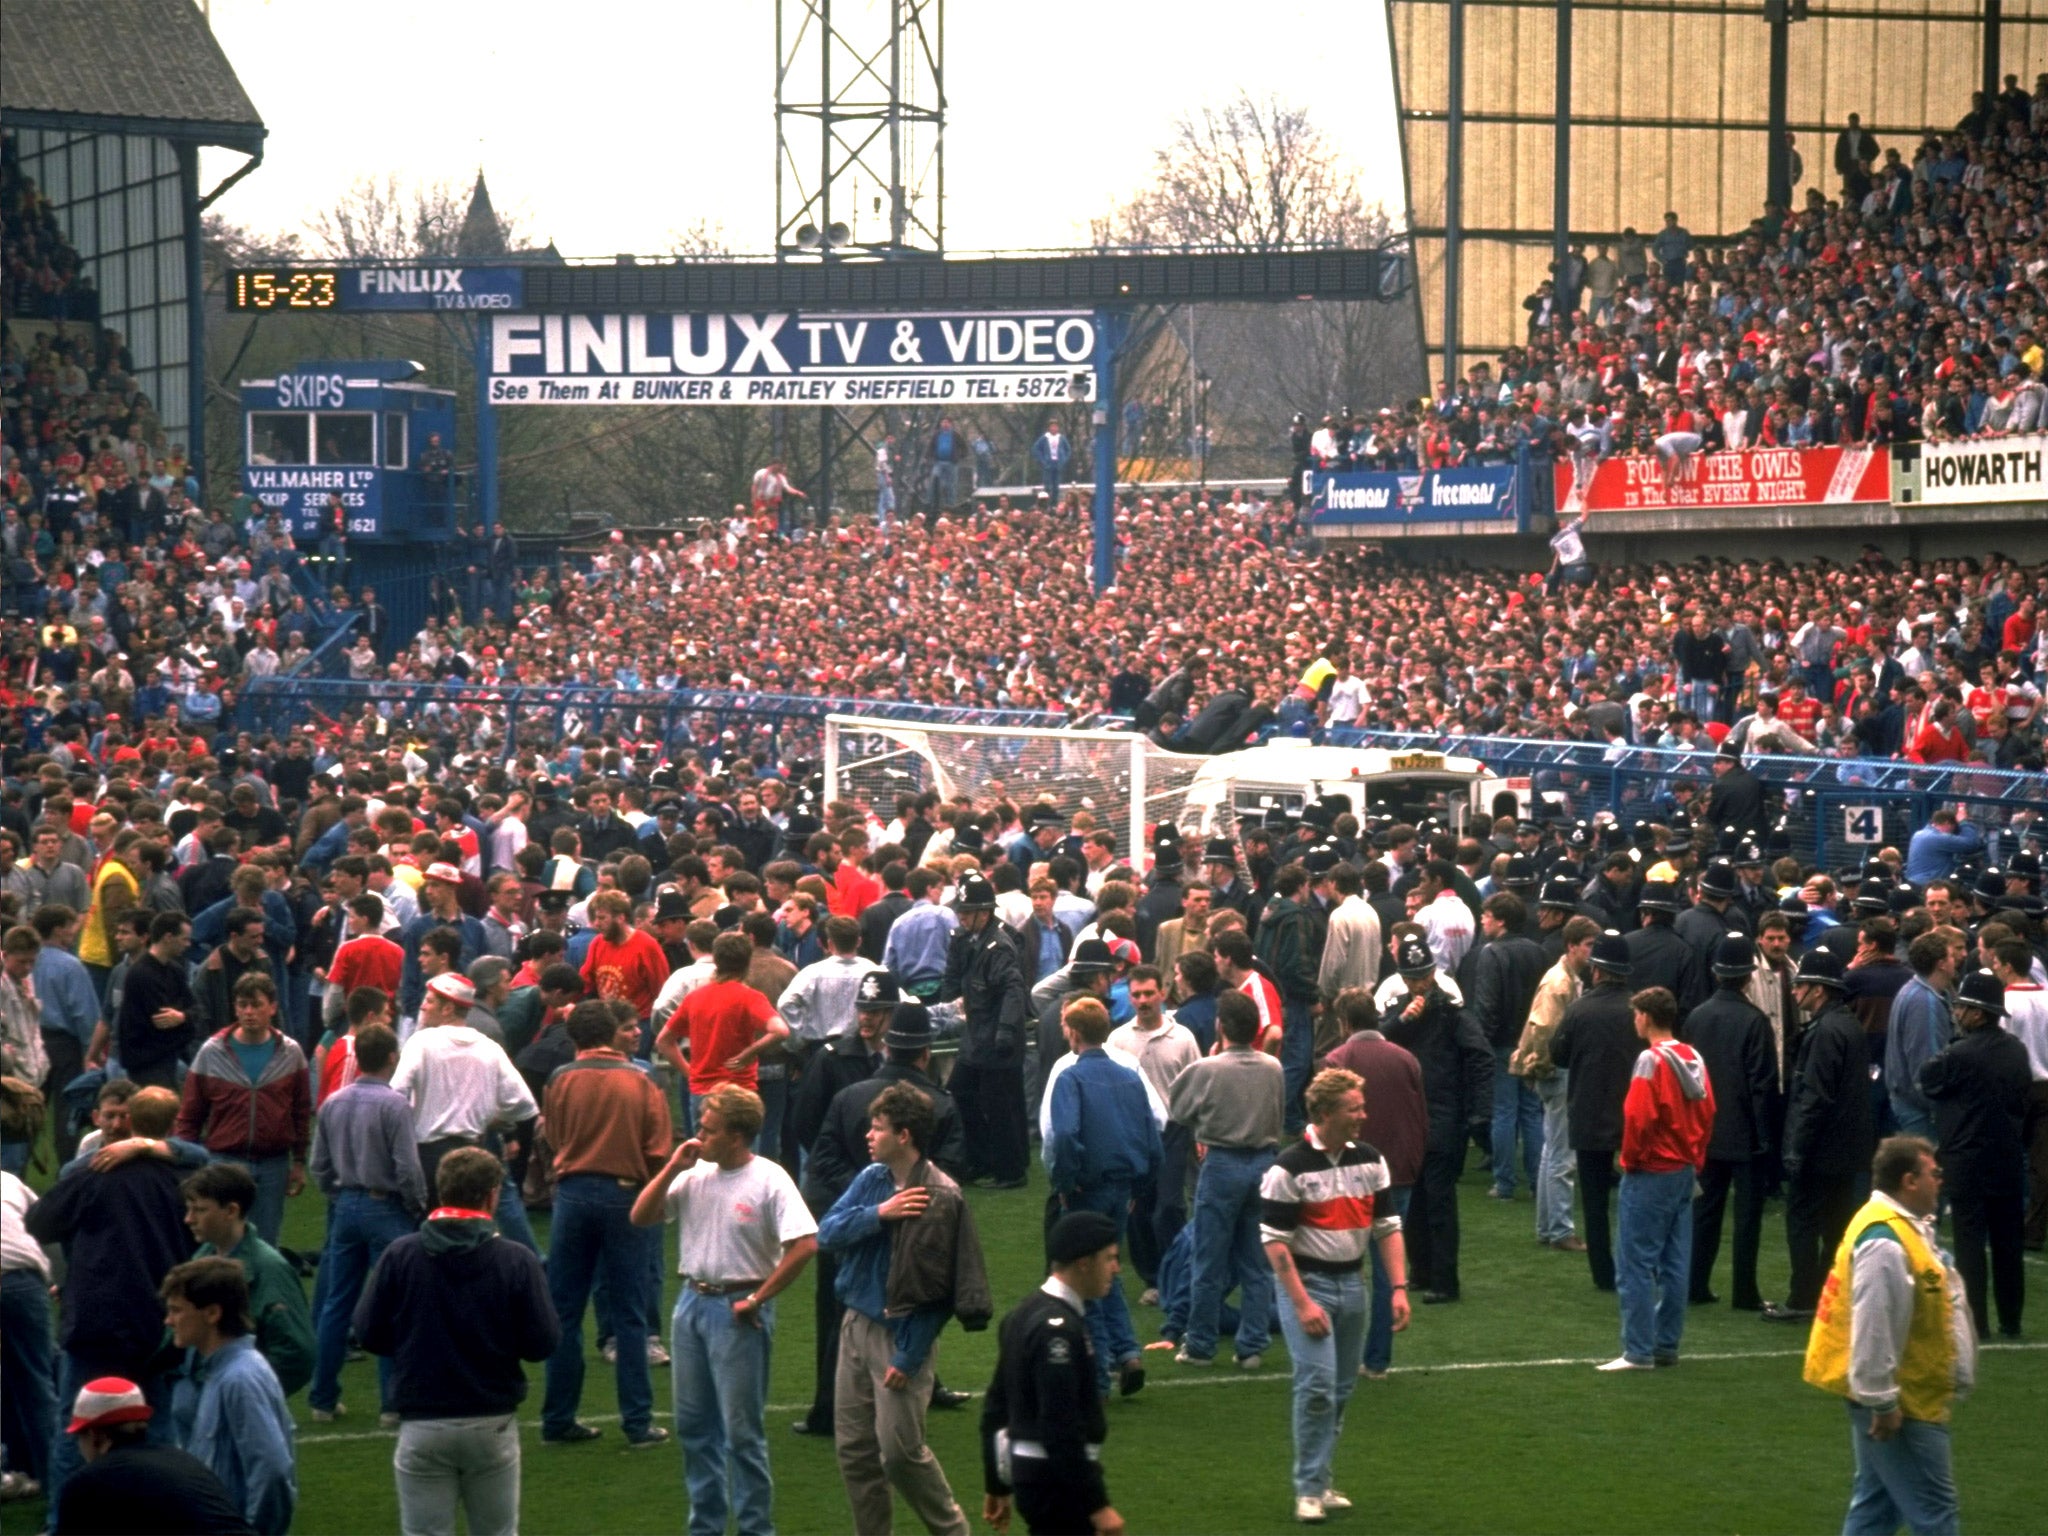 The Hillsborough disaster took the lives of 96 Liverpool fans